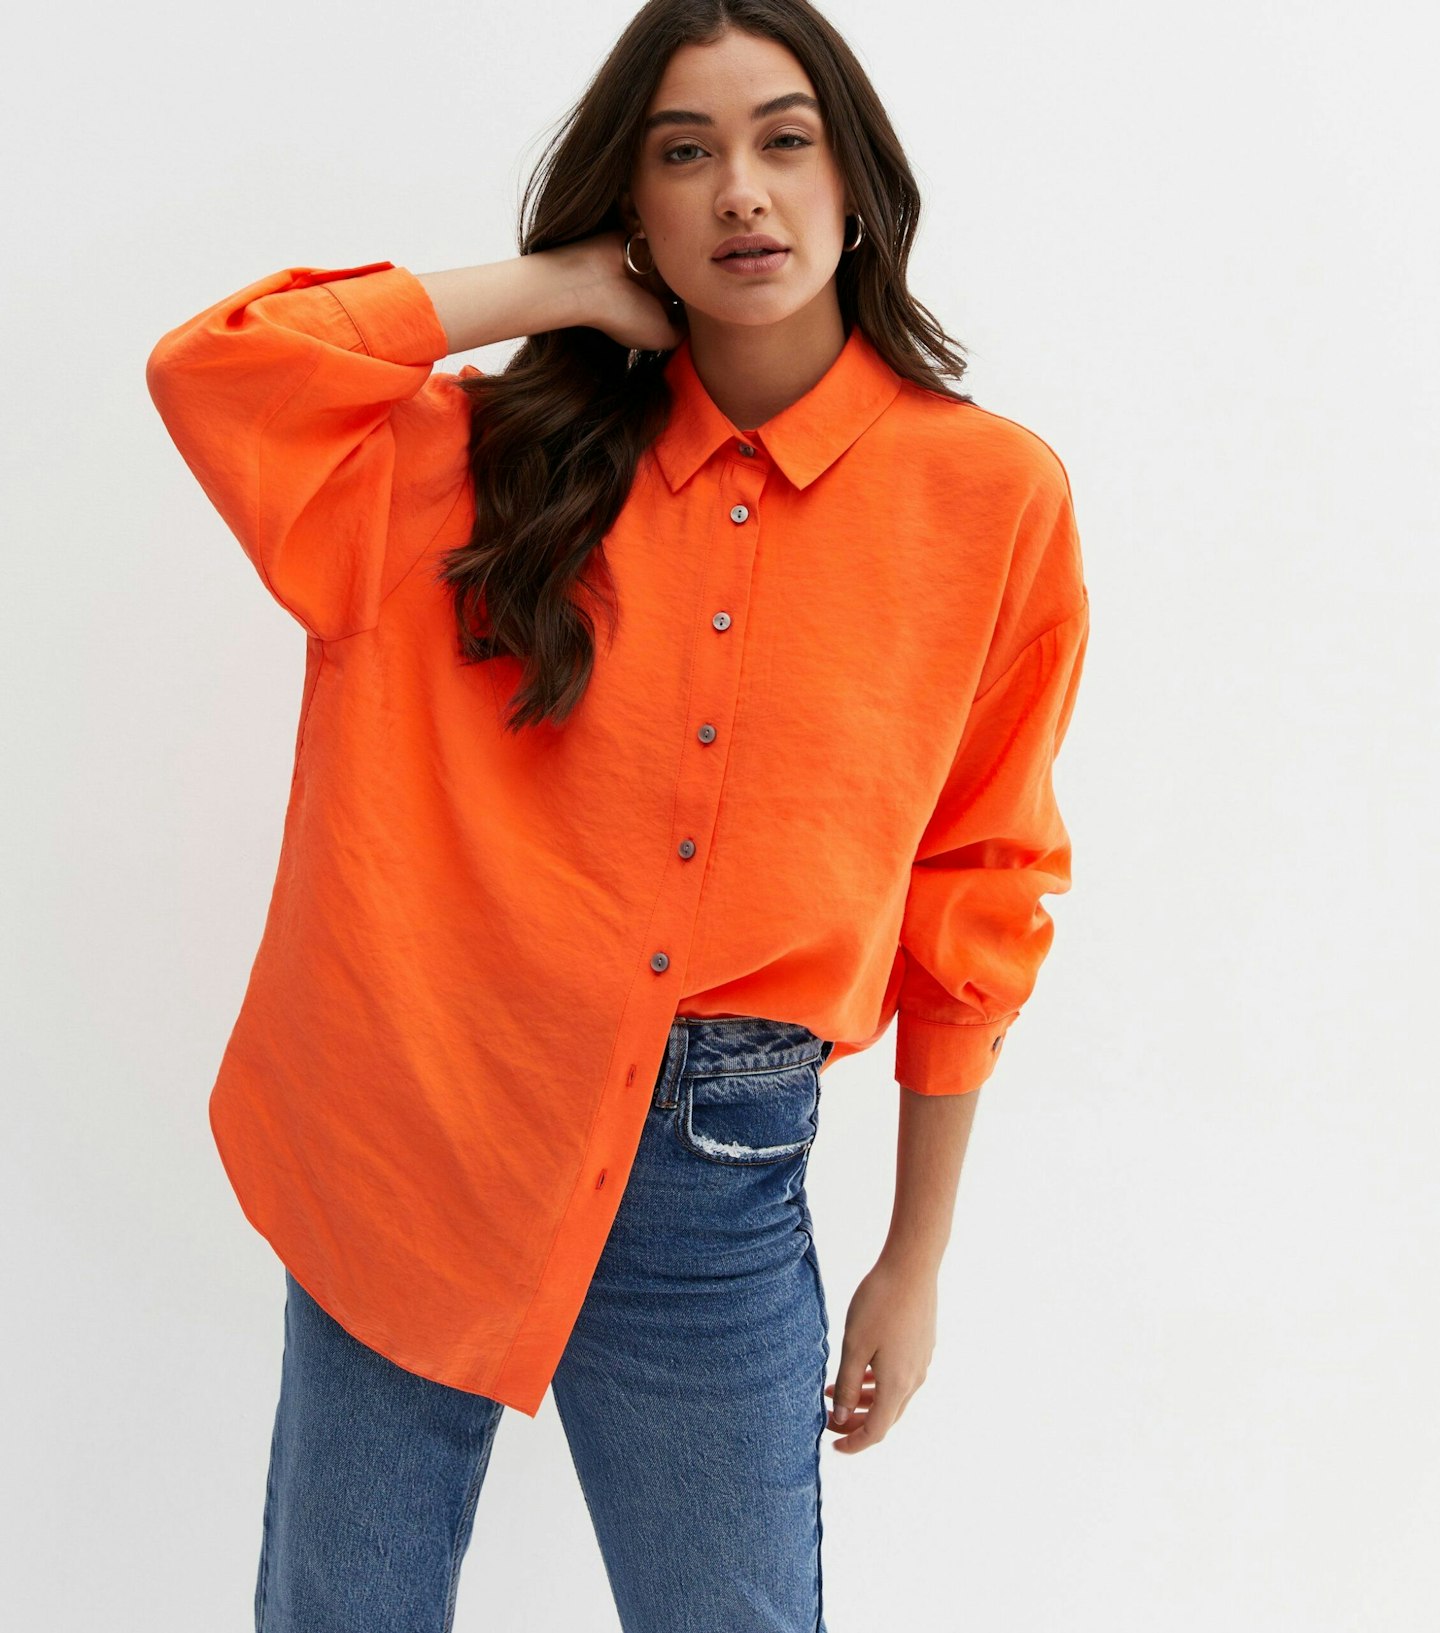 Best oversized shirts 2022: Our top picks for the high-street